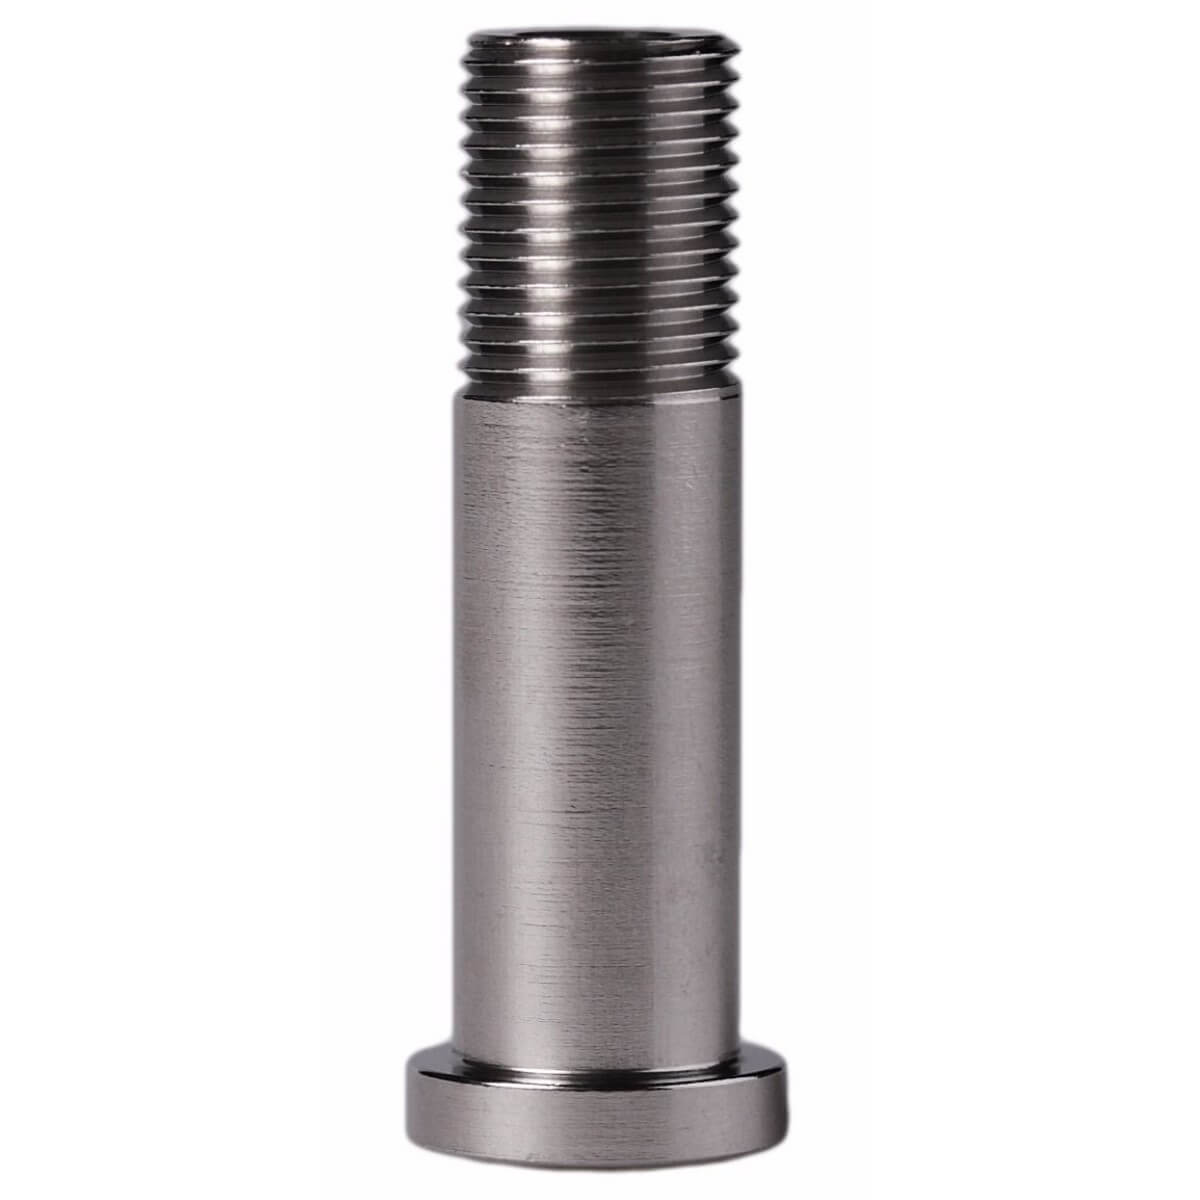 S4 stainless steel bolt for D220, GH-131